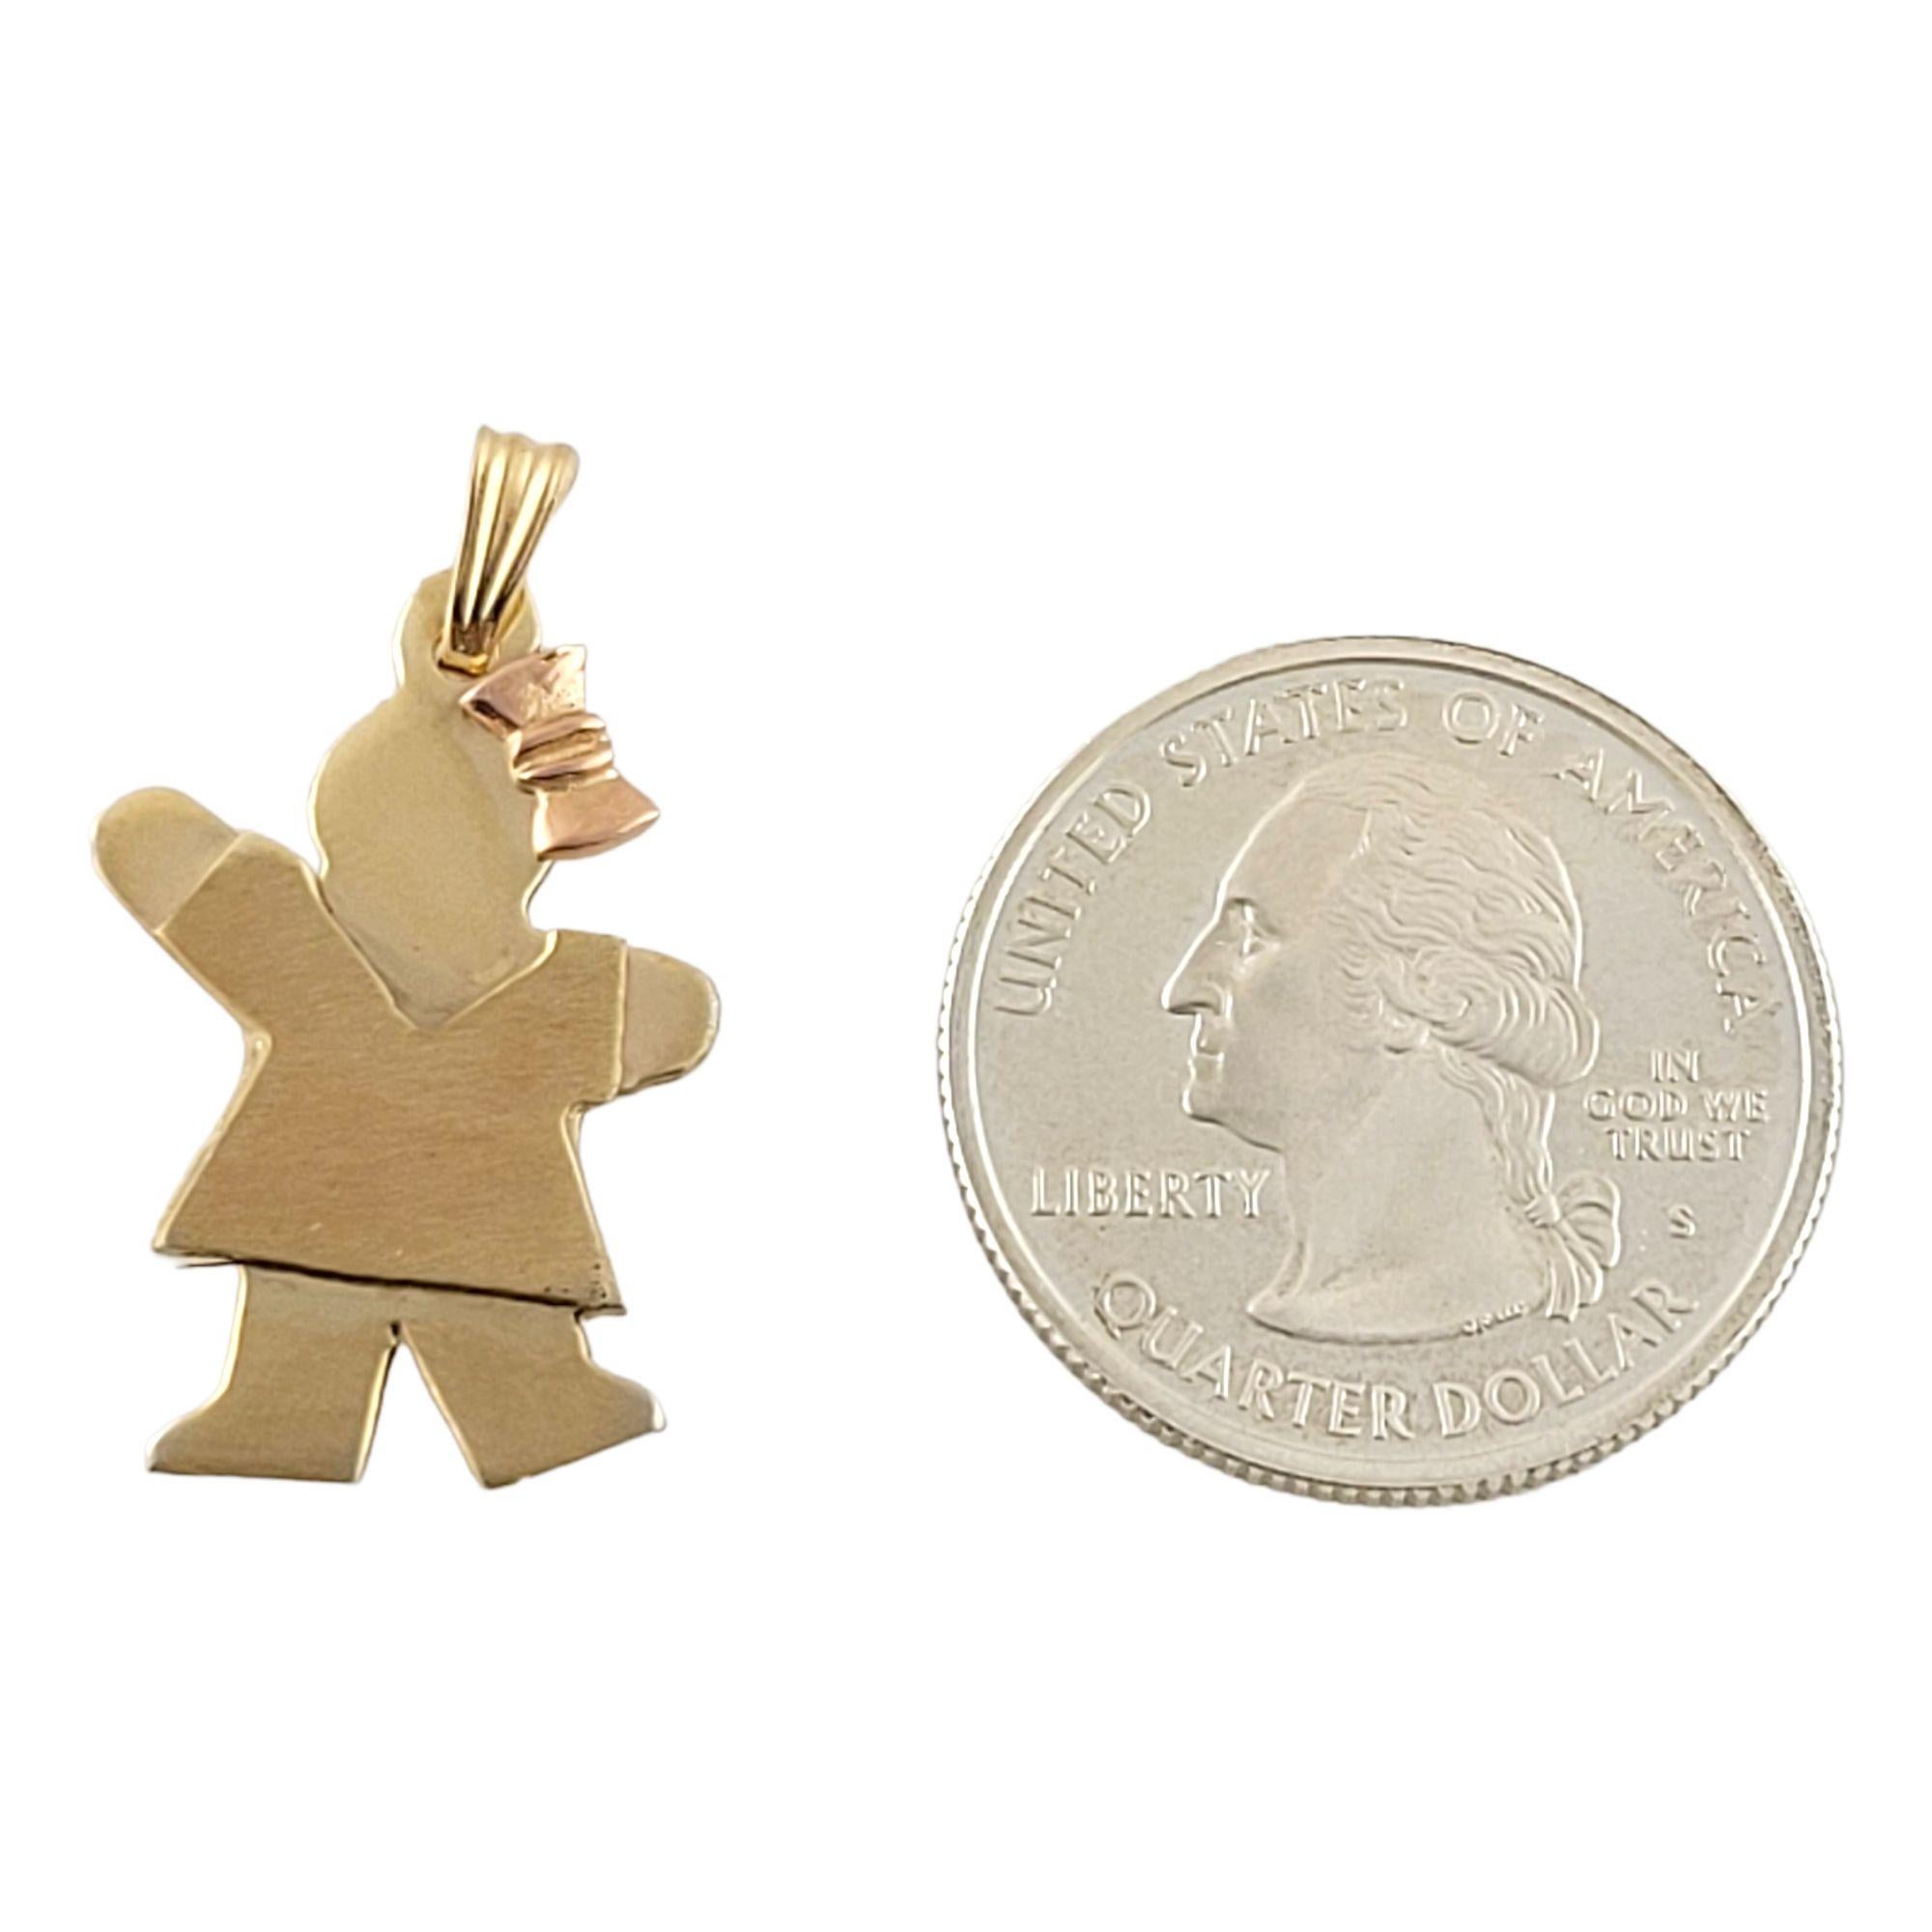 Vintage 14K Yellow Gold Little Girl Charm

This adorable little girl charm will look great on any necklace!

Size: 18mm x 30 mm x 1.5 mm

Weight: 3.2gr / 2.0dwt

Hallmark: 14K

Very good condition, professionally polished.

*Chain not